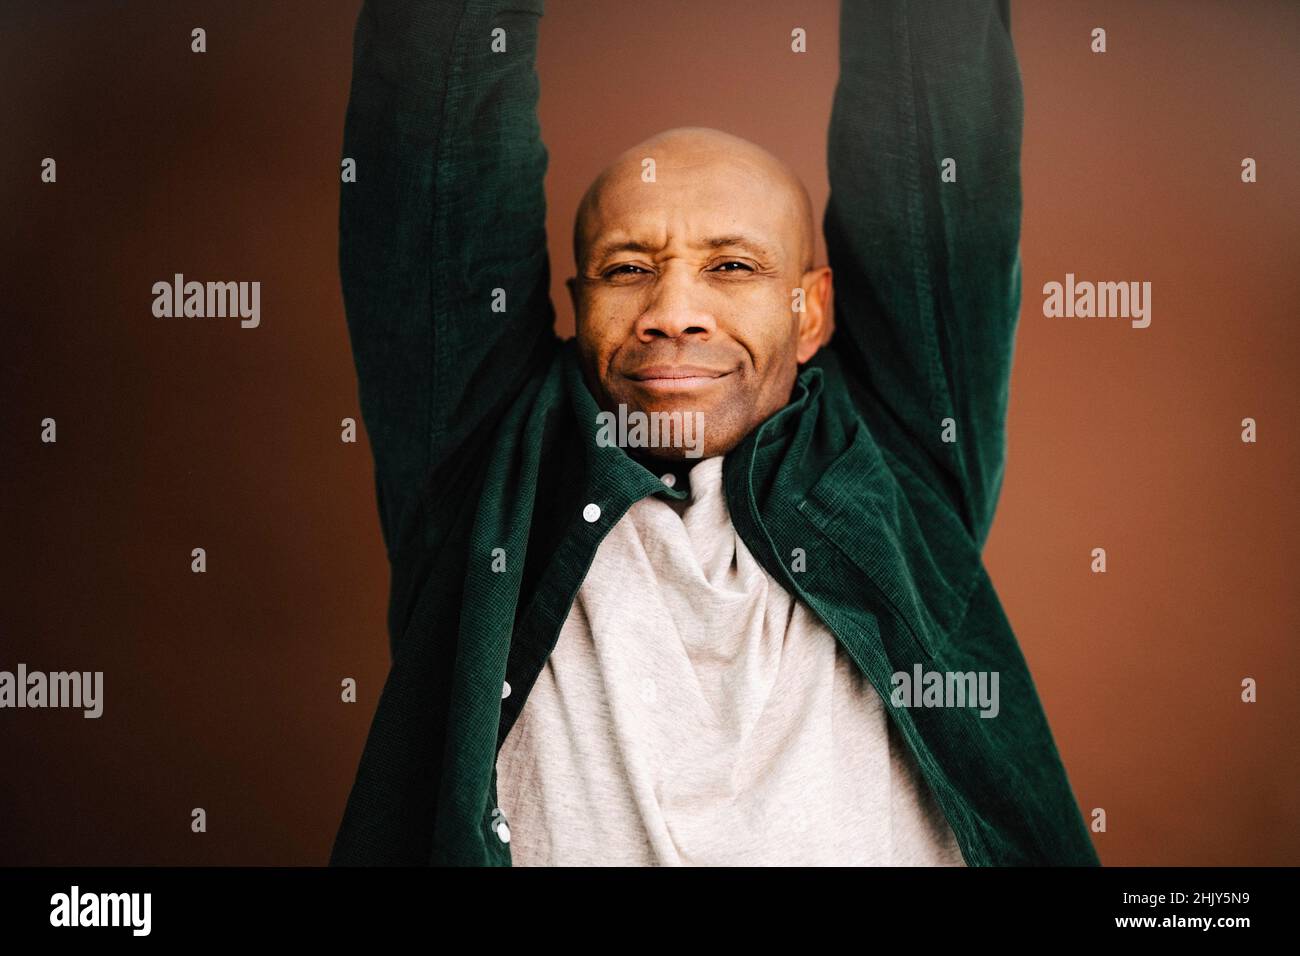 Mature man with arms raised over brown background in studio Stock Photo